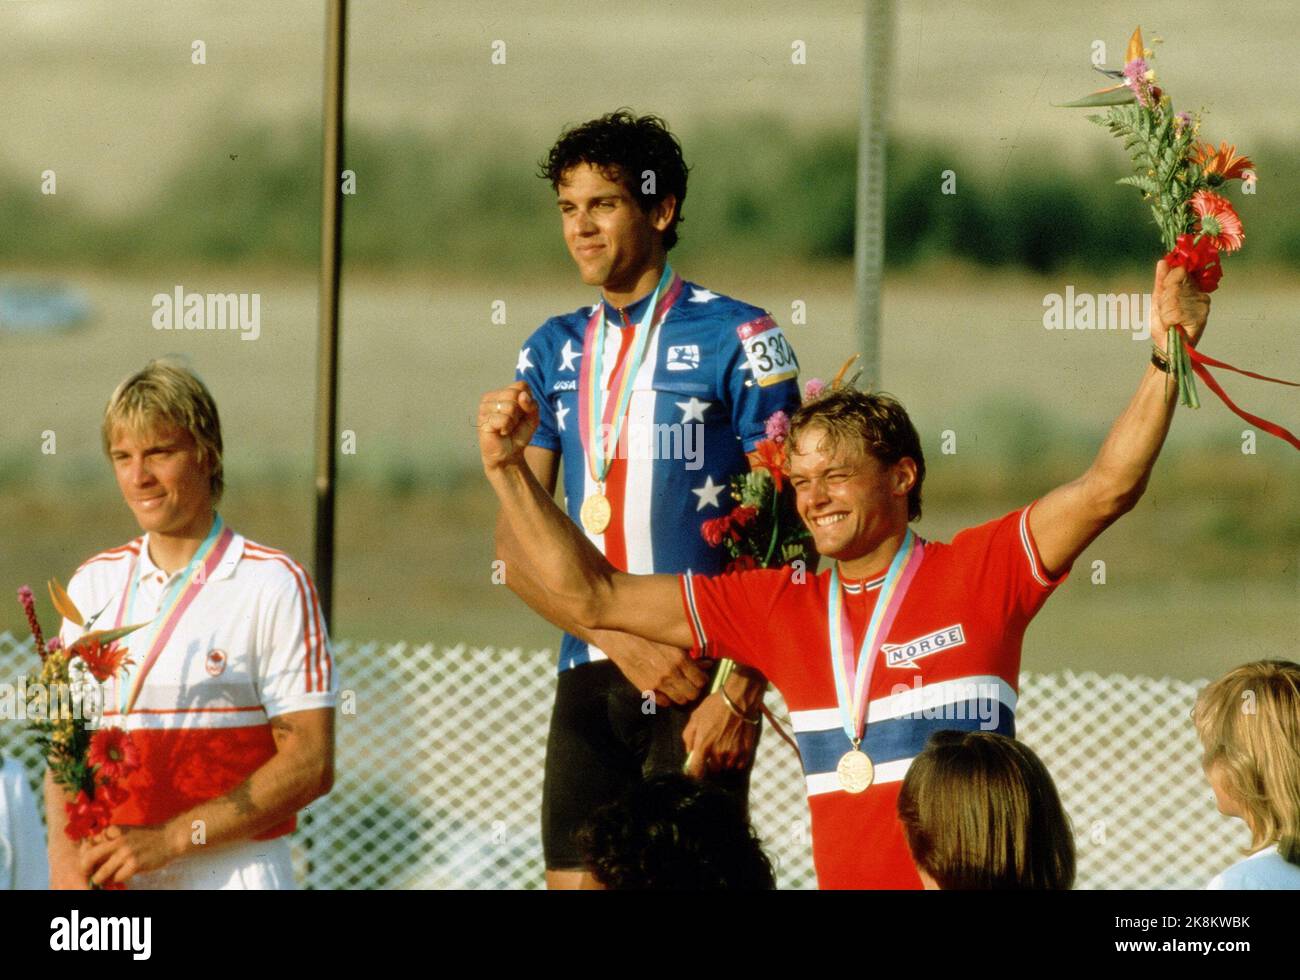 Los Angeles 19840729. The Los Angeles Olympics. Cycling, road rides, men. Eg. Steve Bauer Can. Silver, Alexi Greval Gold, USA and bronze for Dag Otto Lauritzen Norway, on the victory podium. Photo: Bjørn Sigurdsøn NTB / NTB Stock Photo